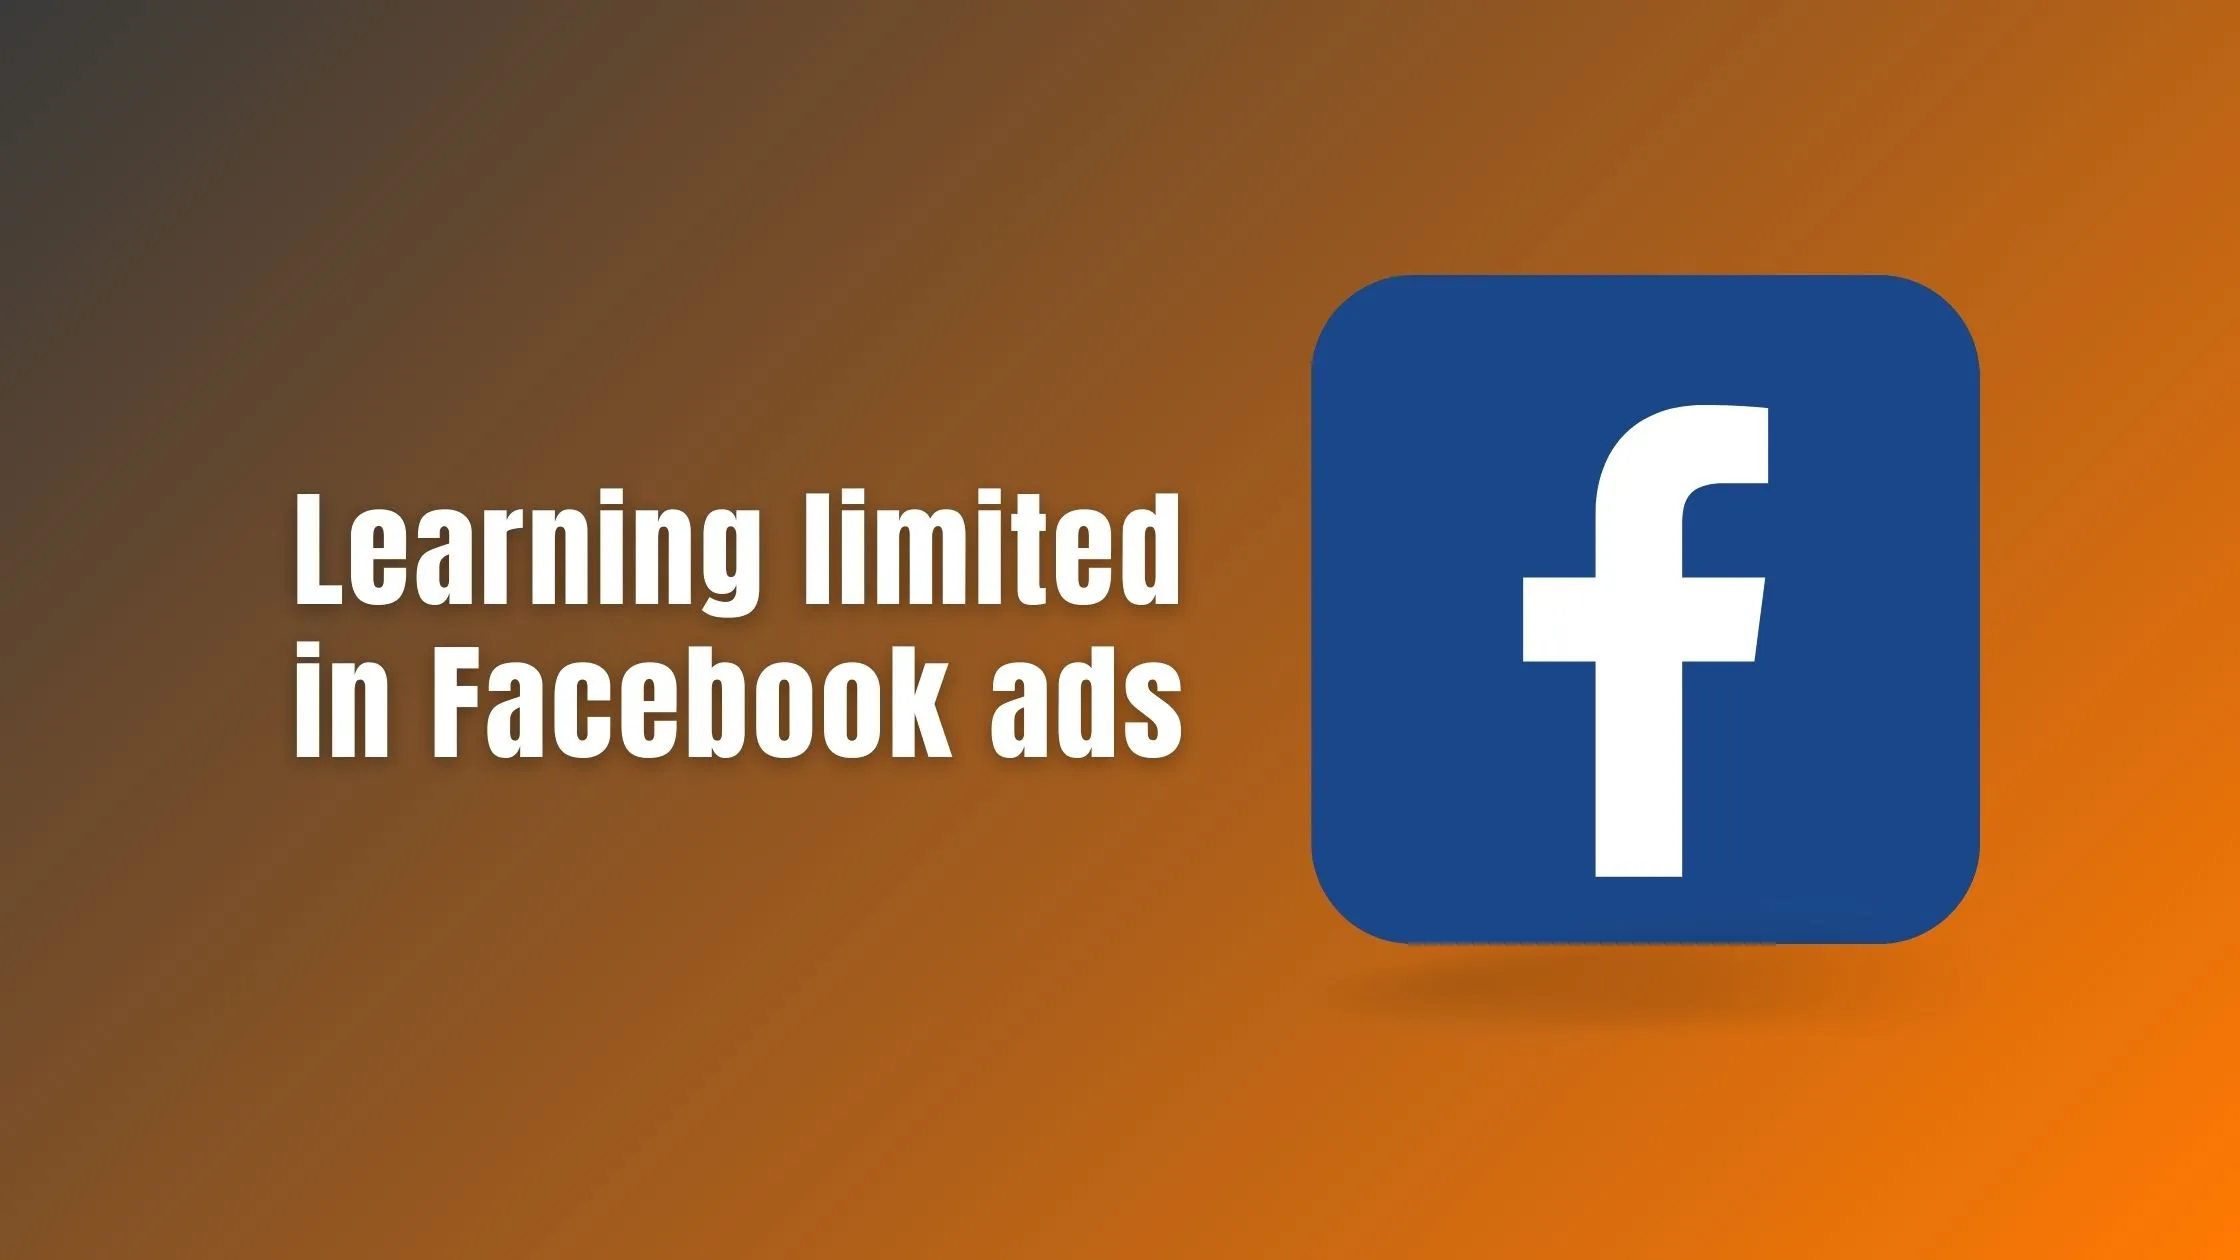 Learning limited in Facebook ads